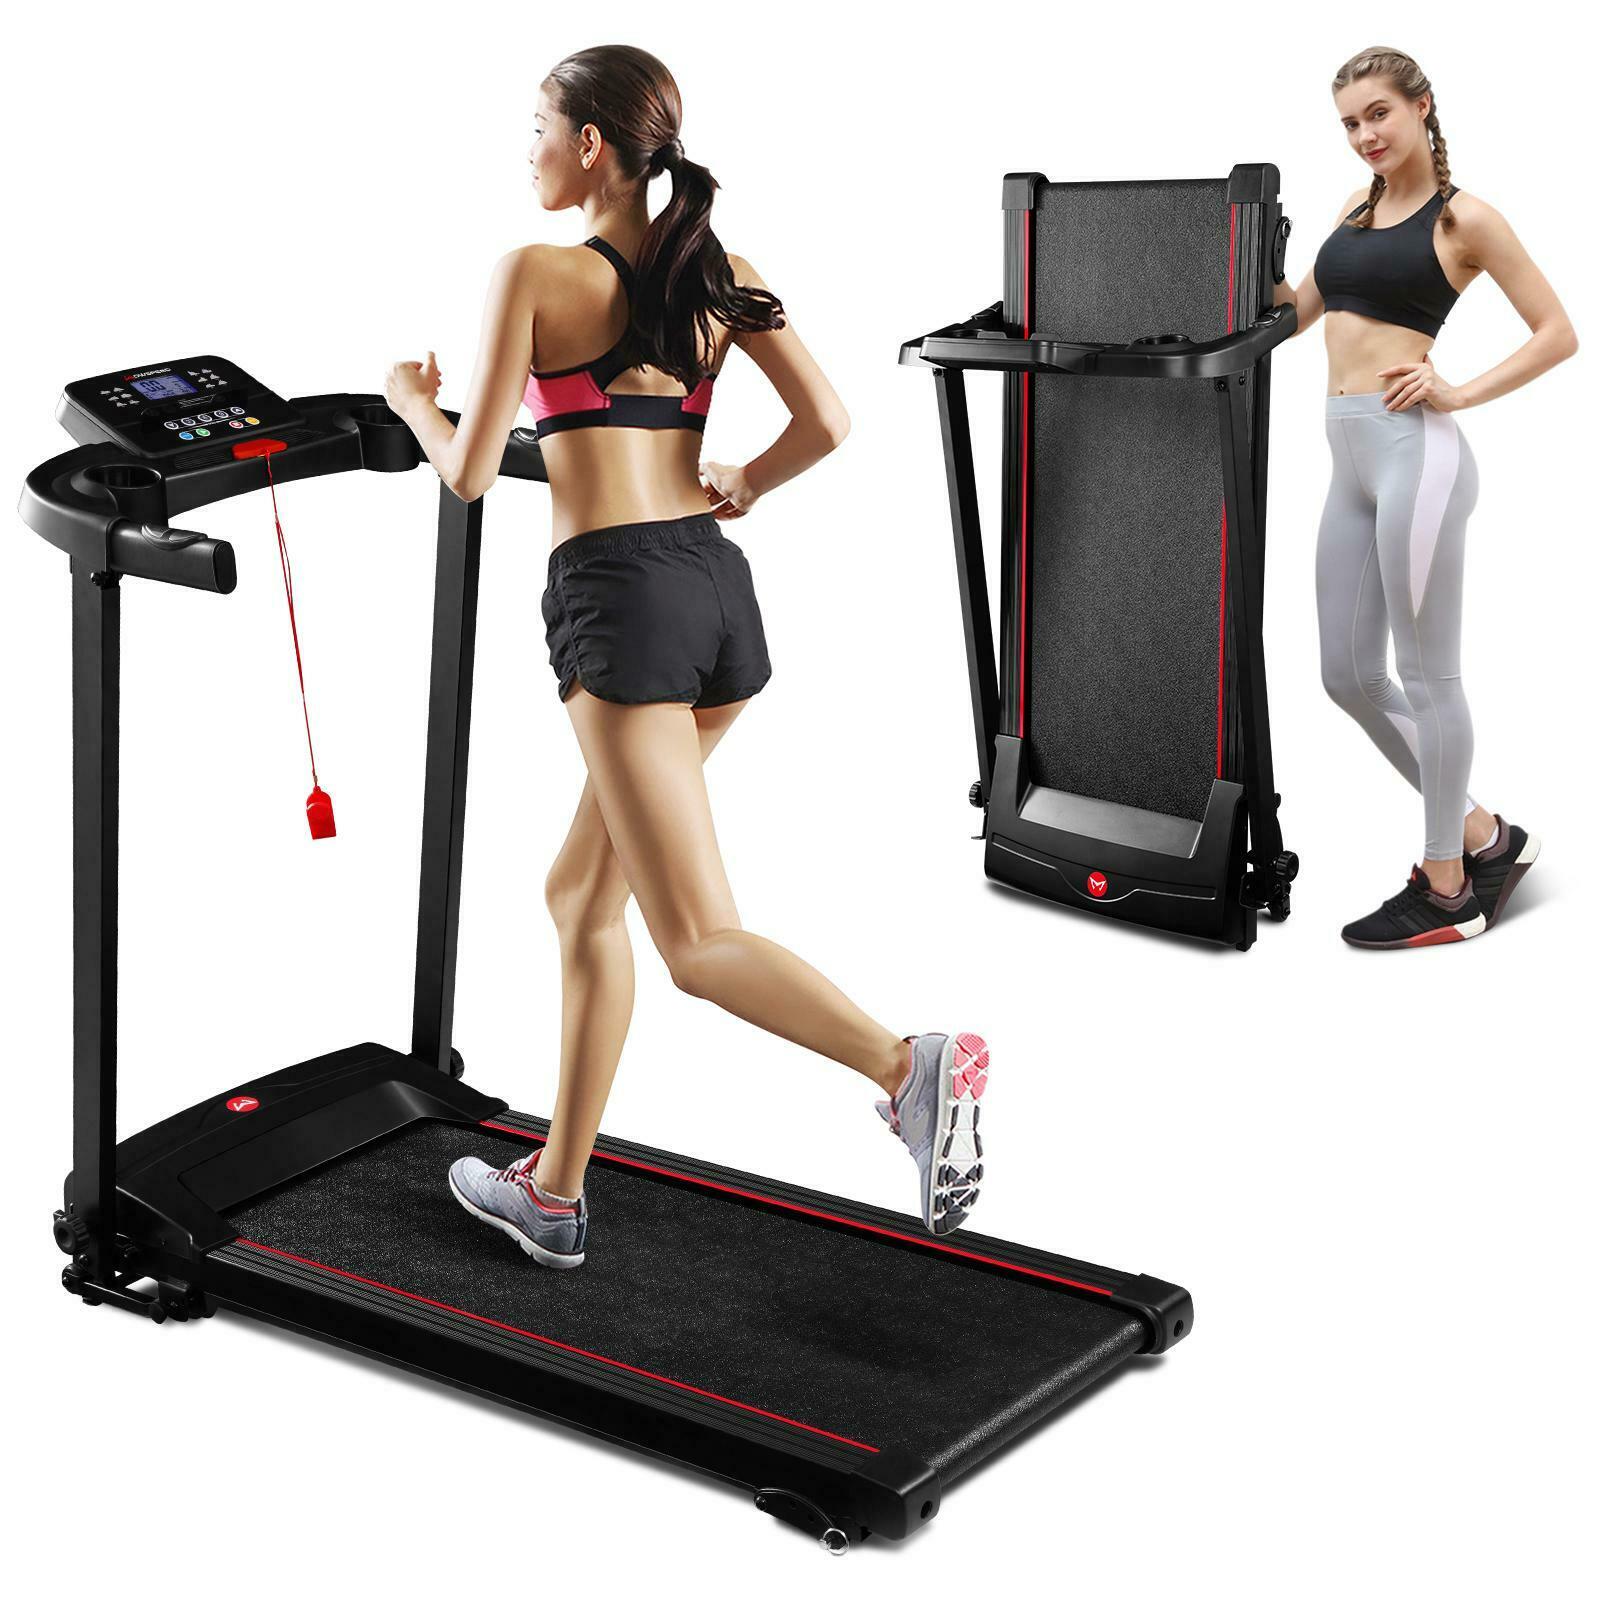 Treadmill 2.0hp Electric Motorized Folding Running Machine Home Office Gym Us